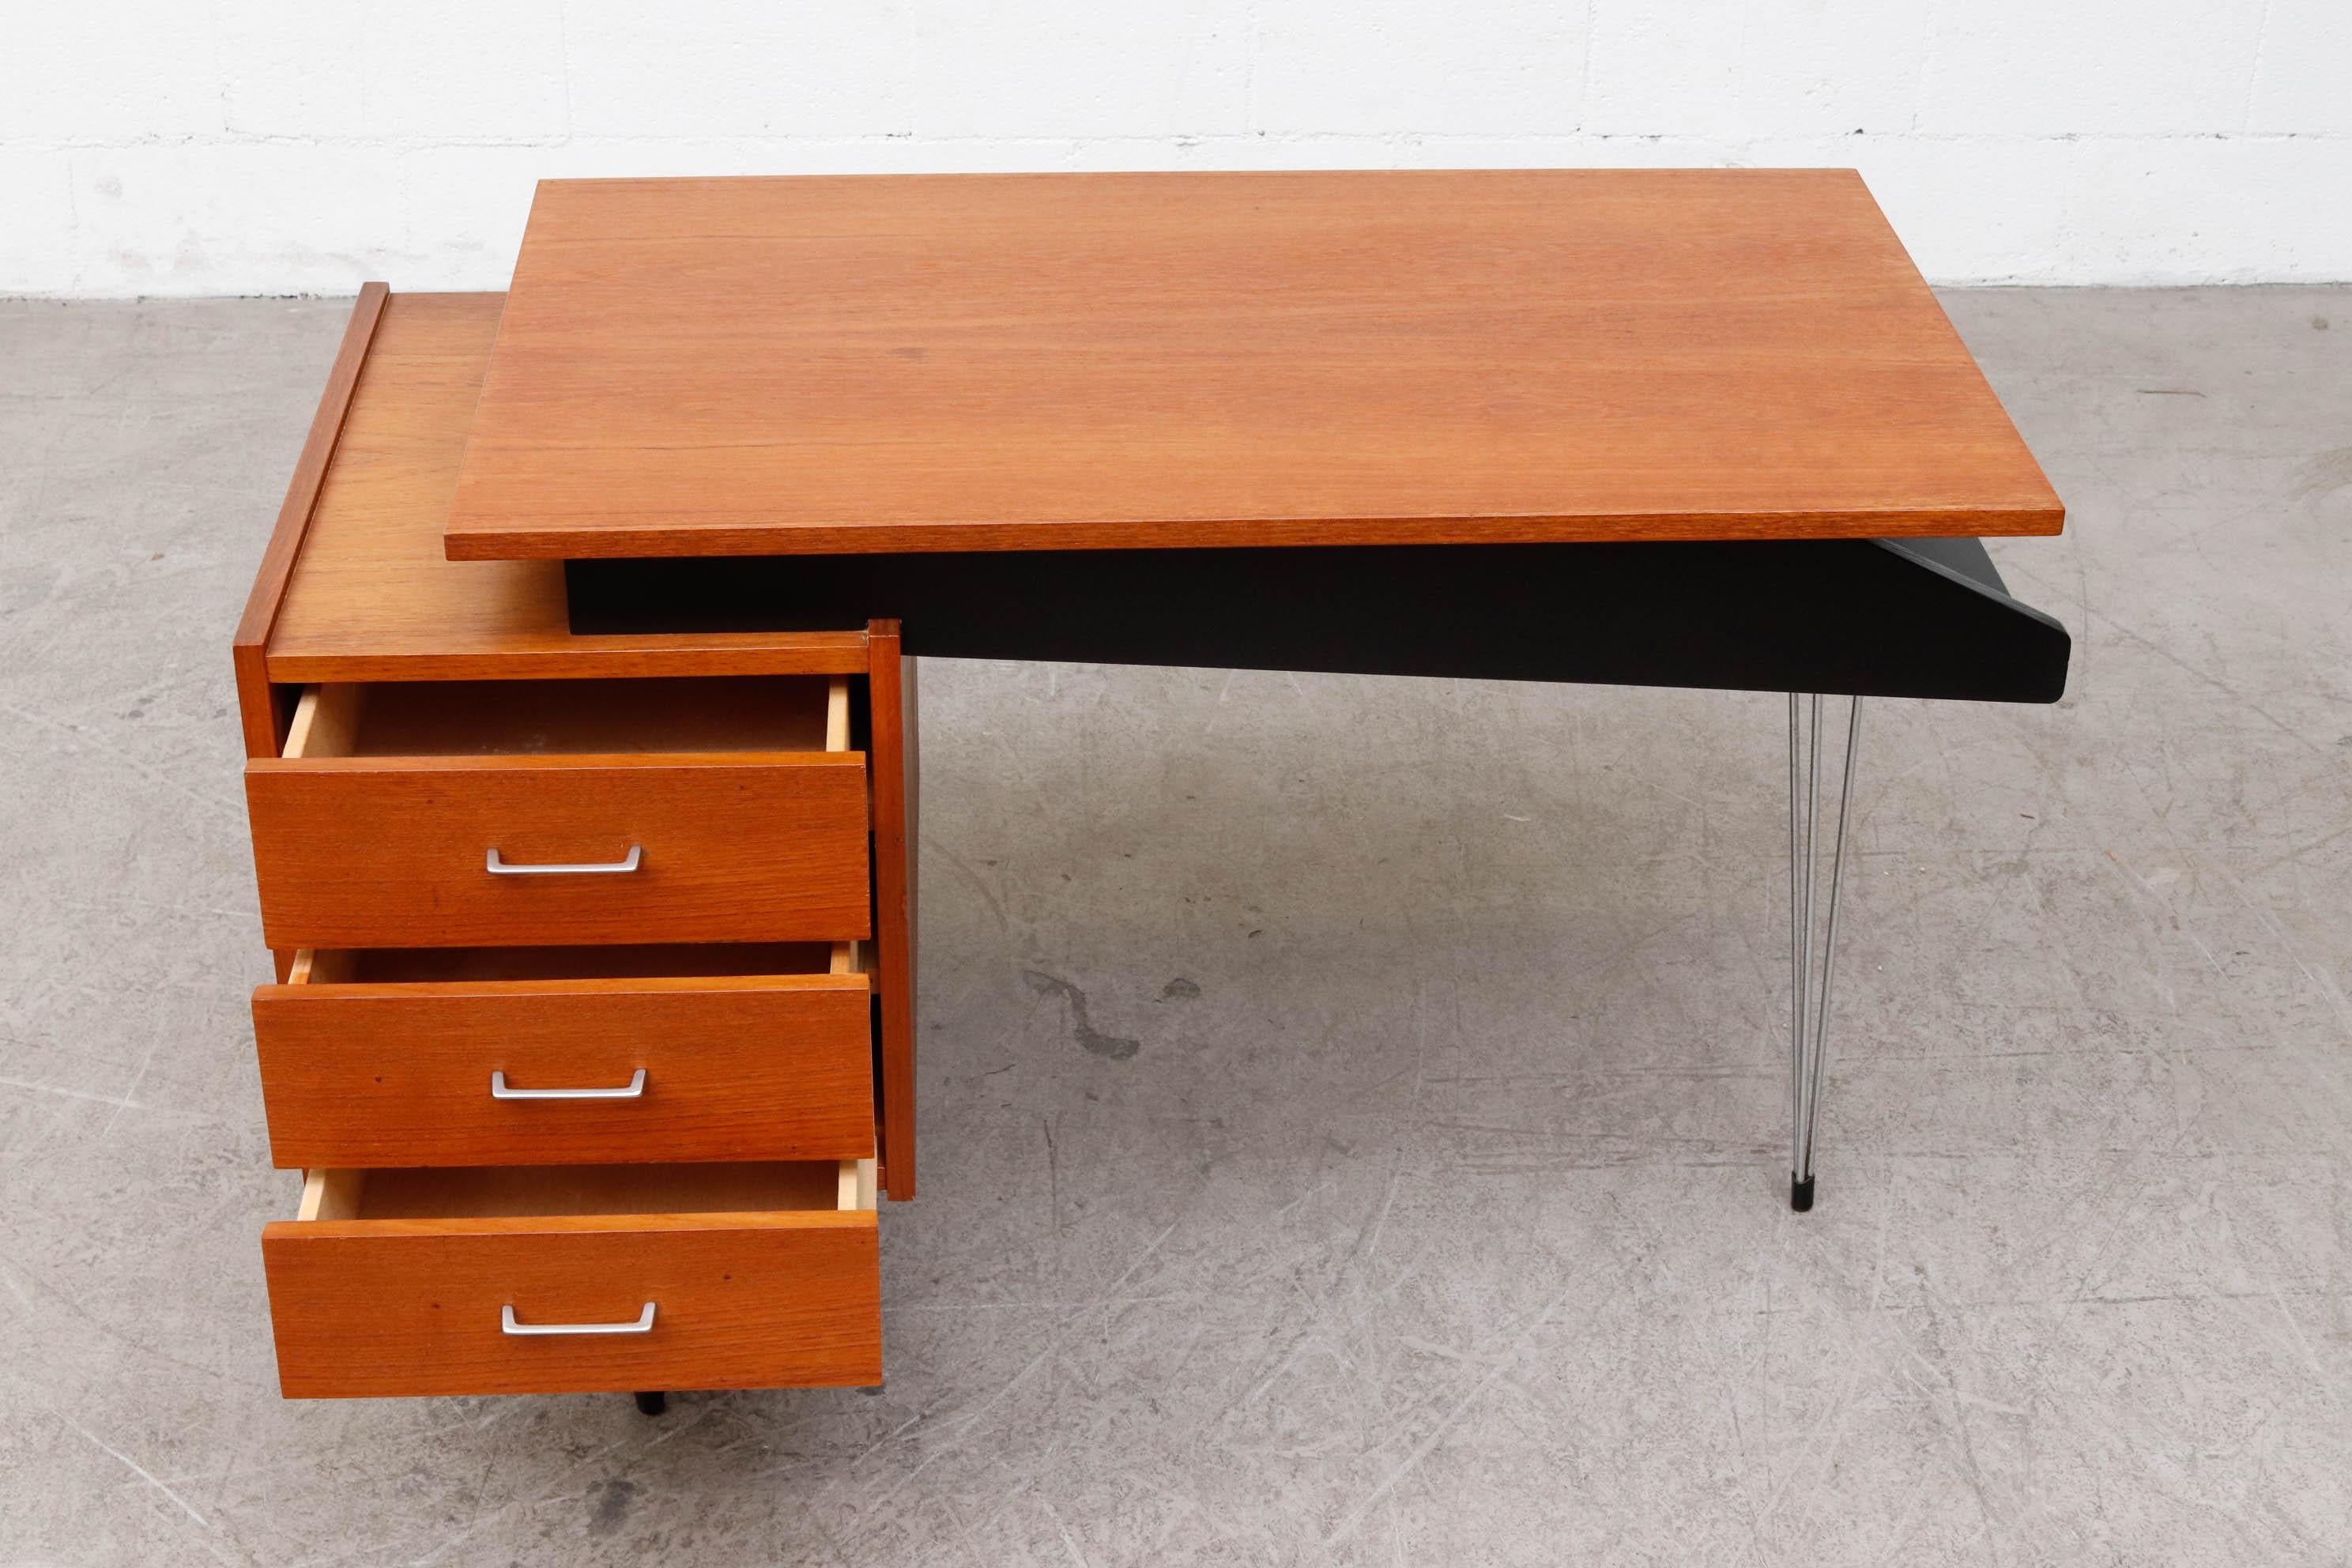 Metal Cees Braakman Desk with Hairpin Legs and Asymmetrical Design